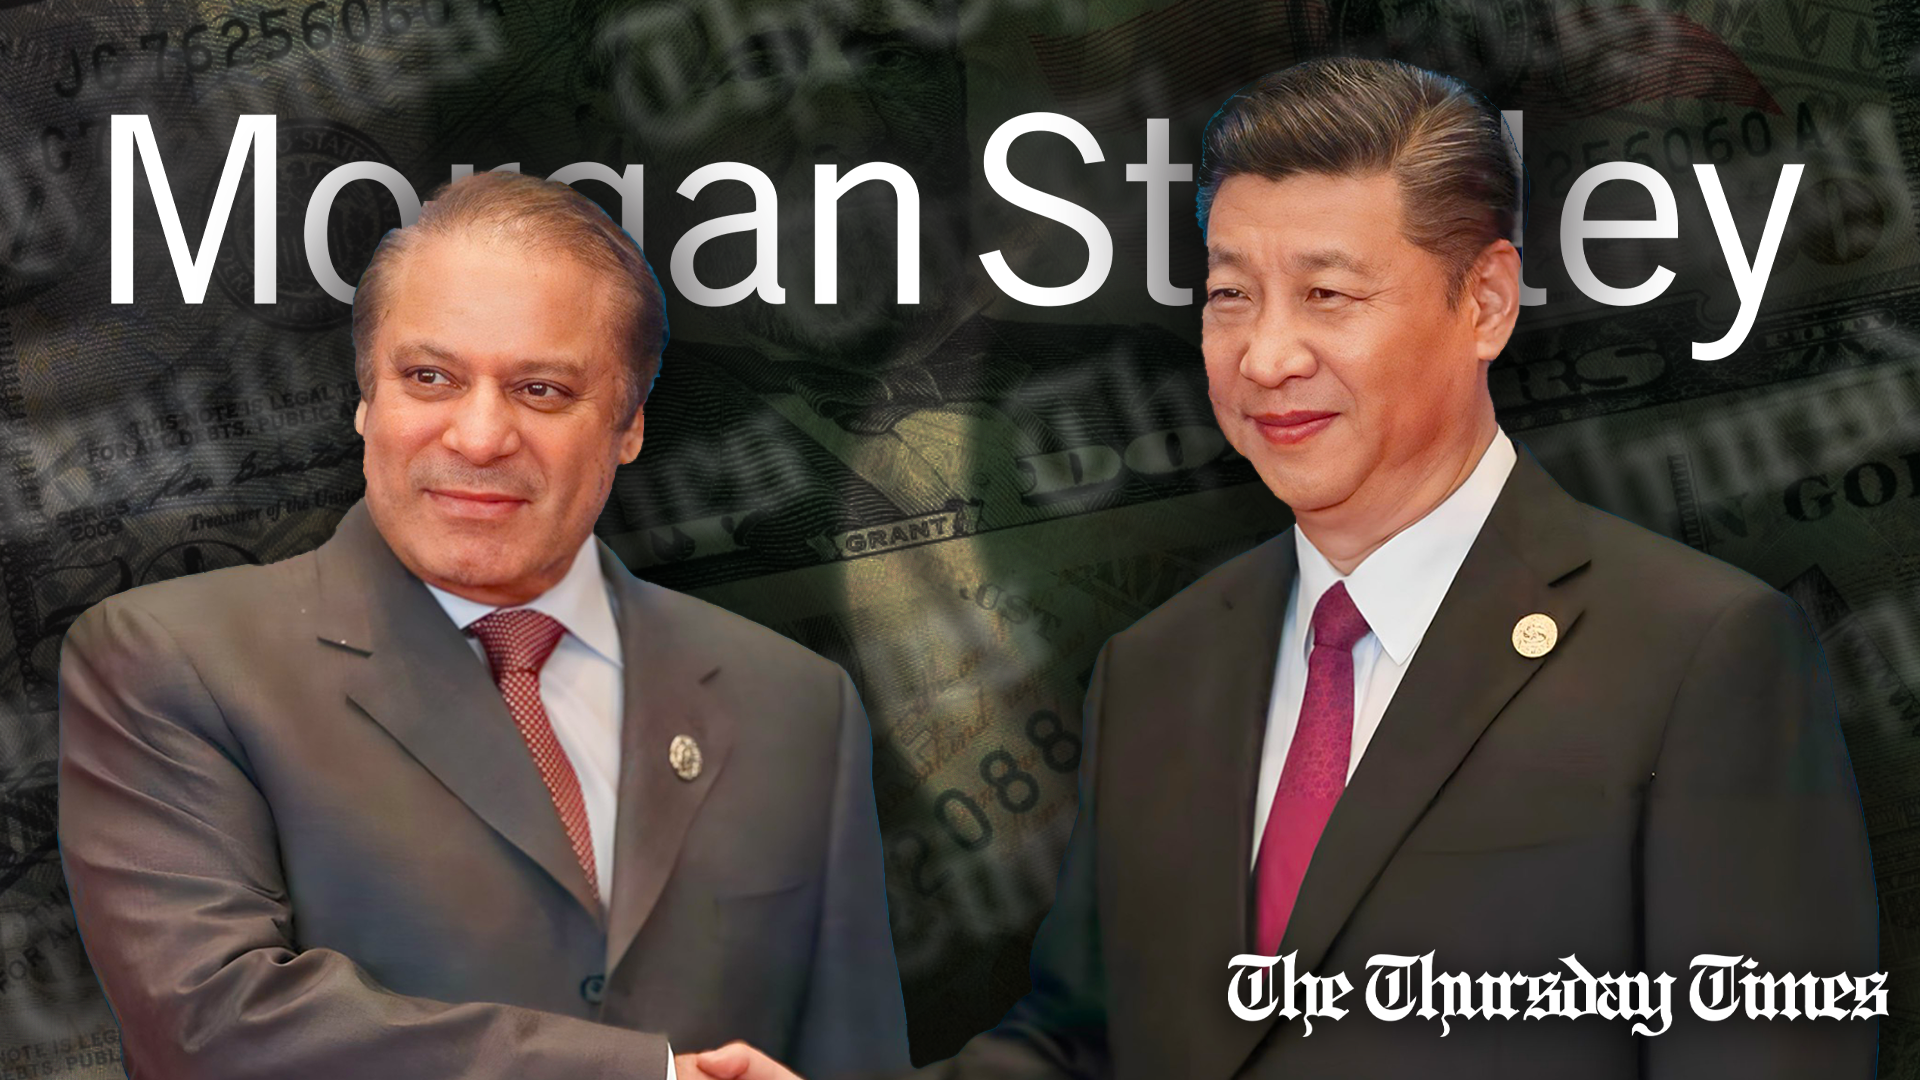 A file photo is shown of PML(N) supremo Nawaz Sharif (L) with Chinese president Xi Jinping at Beijing on May 15, 2017. — FILE/THE THURSDAY TIMES